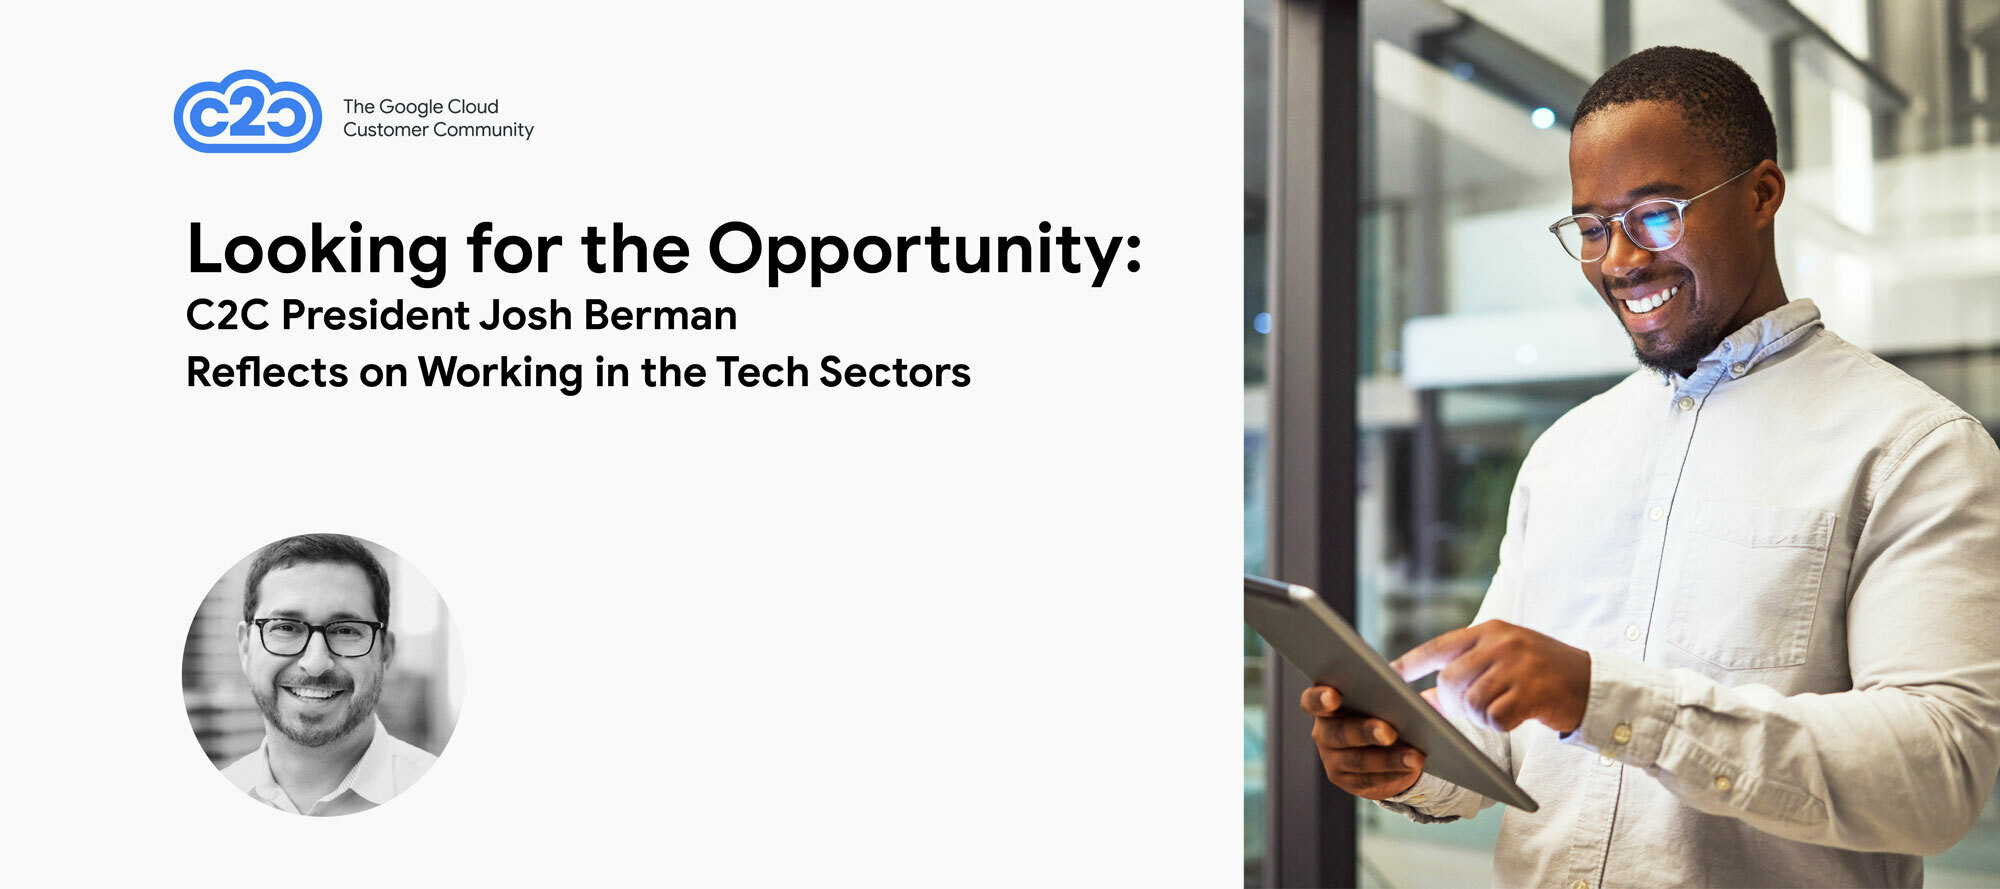 Looking for the Opportunity: C2C President Josh Berman Reflects on Working in the Tech Sector